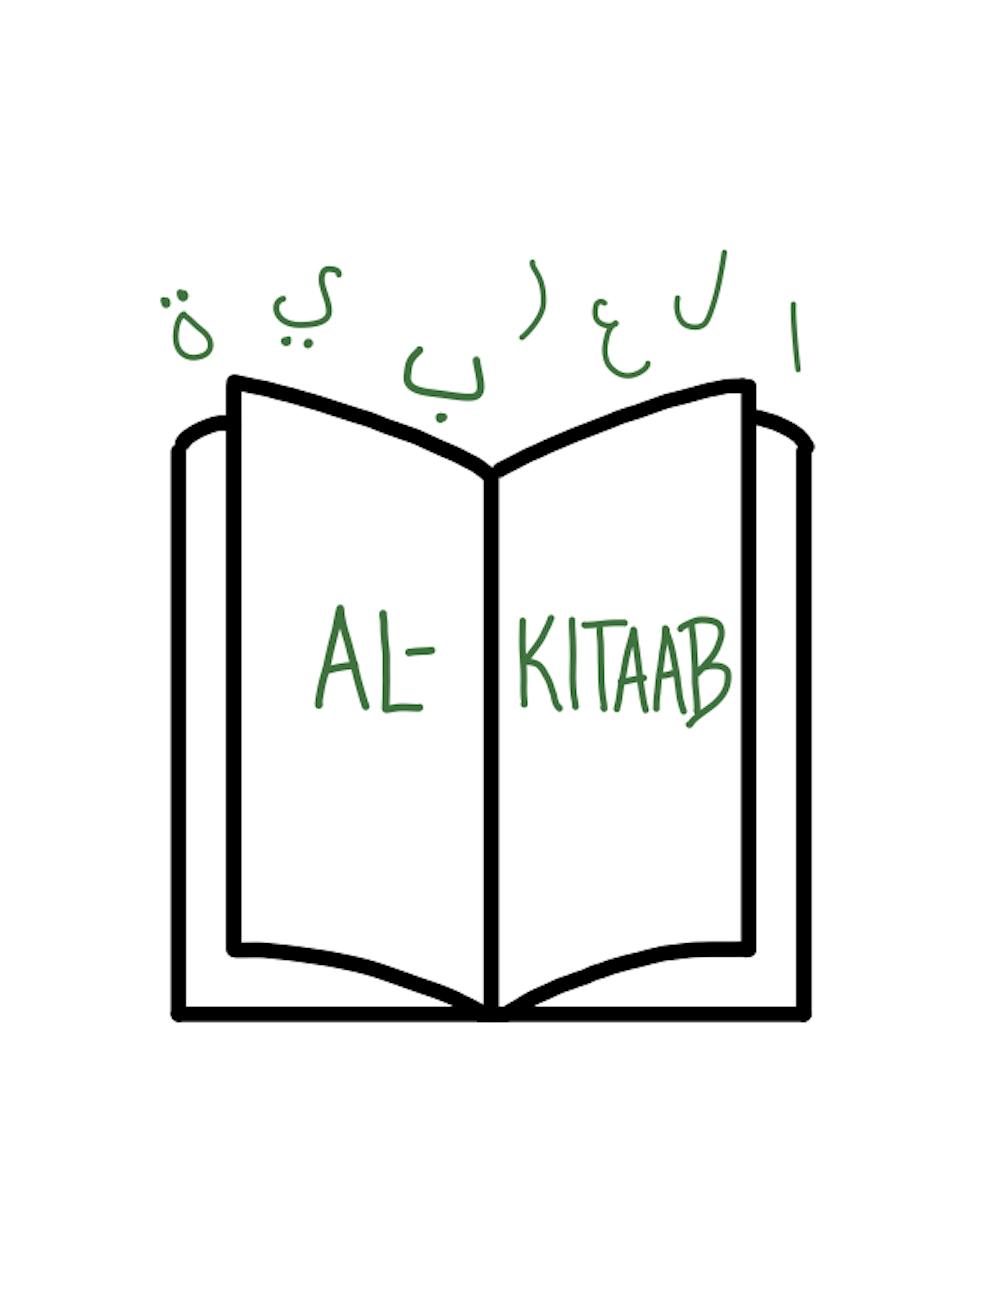 The material presented in Al-Kitaab frames the way new language learners think about and communicate in Arabic, but the book also receives funds from a federal agency that funnels students into the government’s agenda.